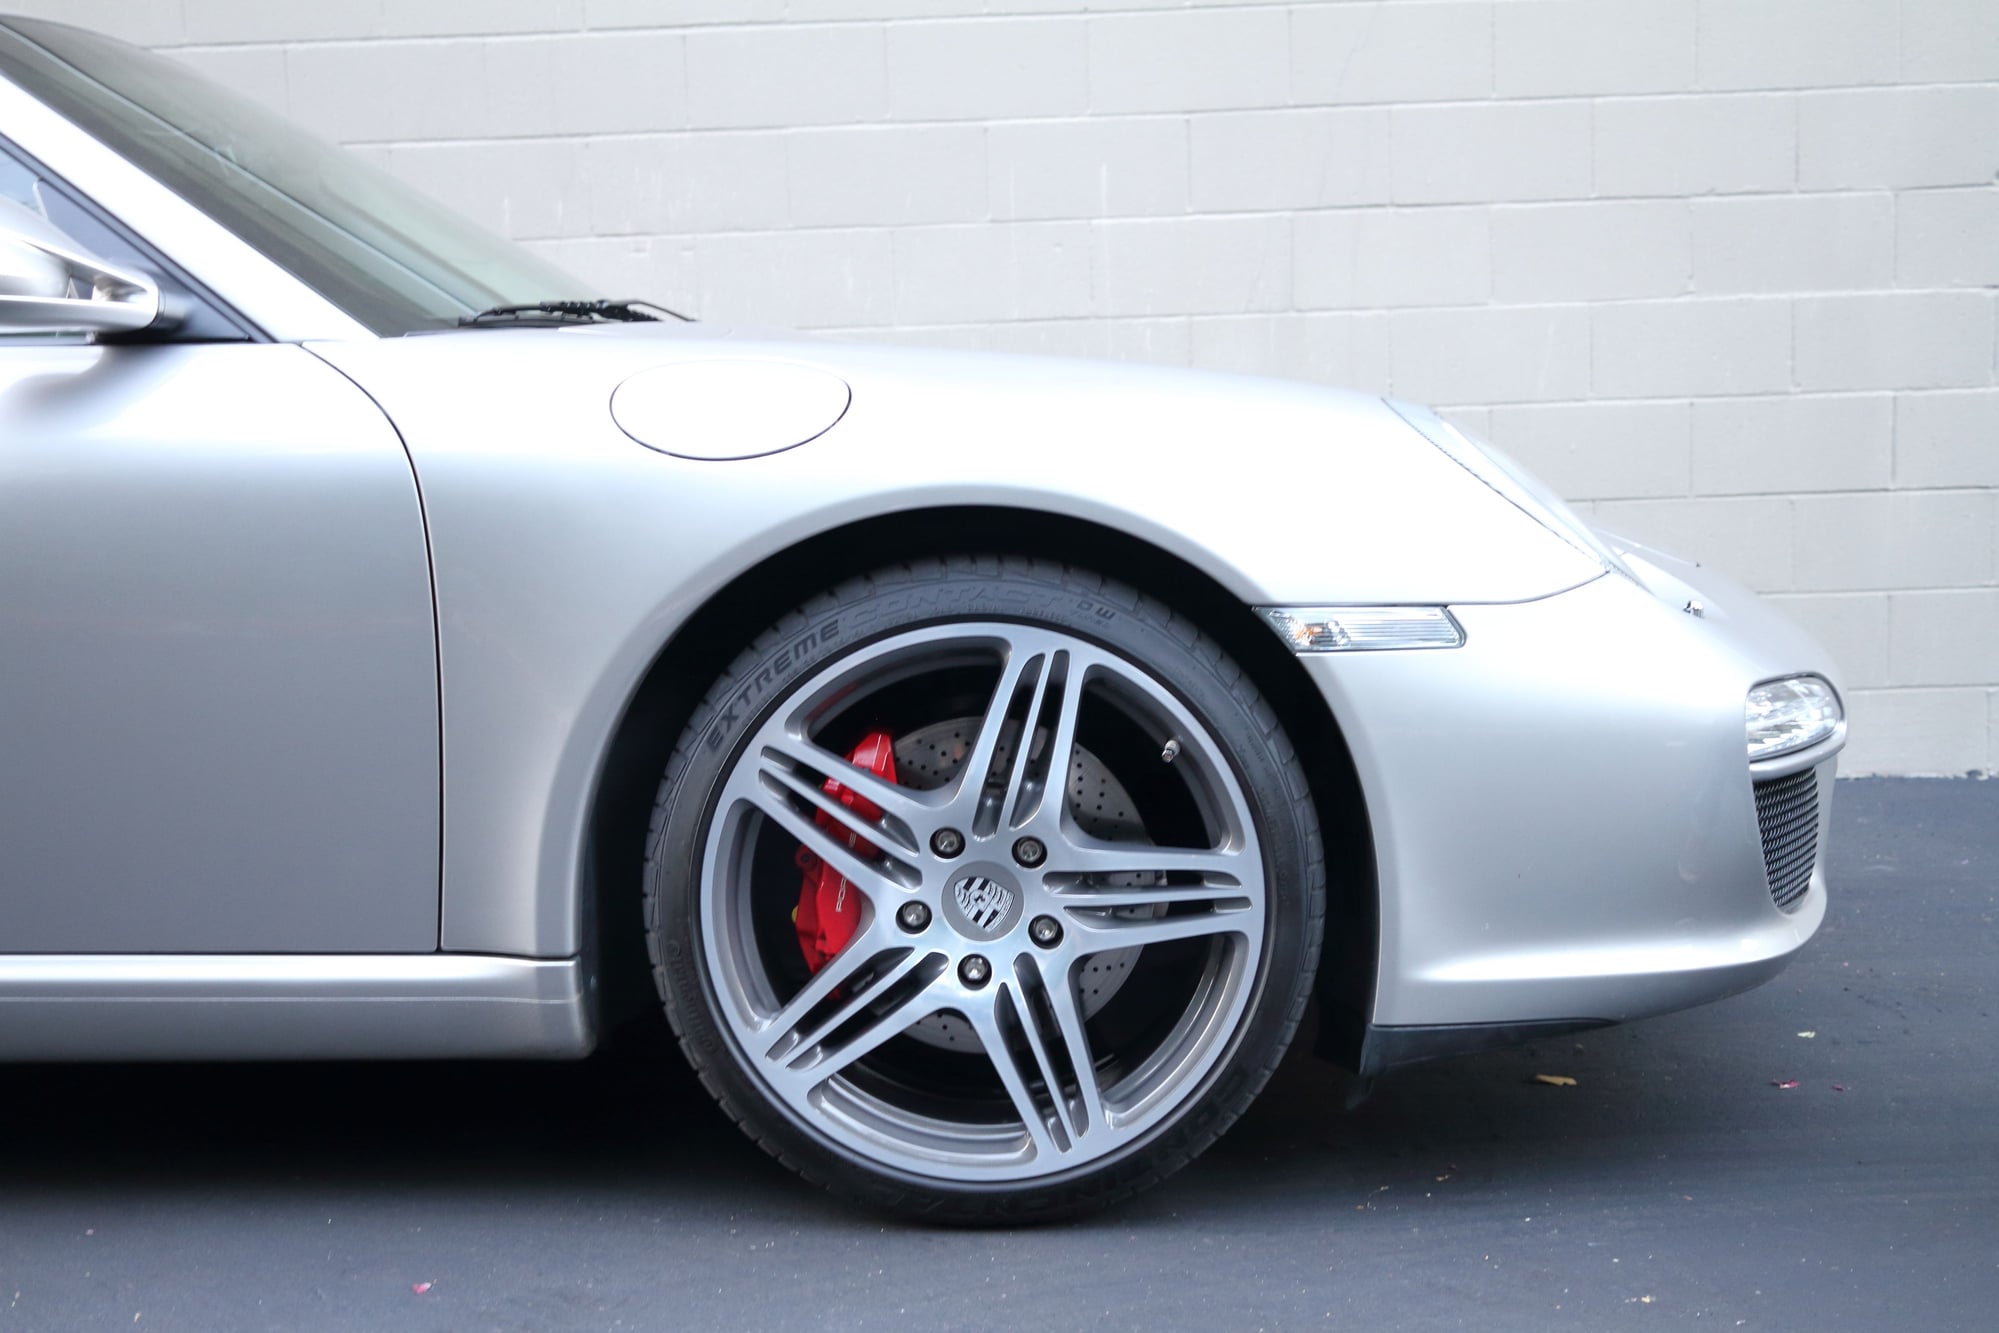 2012 Porsche 911 - rare 2012 997.2 6MT C2S in platinum silver in excellent mechanical condition - Used - VIN WP0AB2A99CS720798 - 56,000 Miles - 6 cyl - 2WD - Manual - Coupe - Silver - Campbell, CA 95008, United States